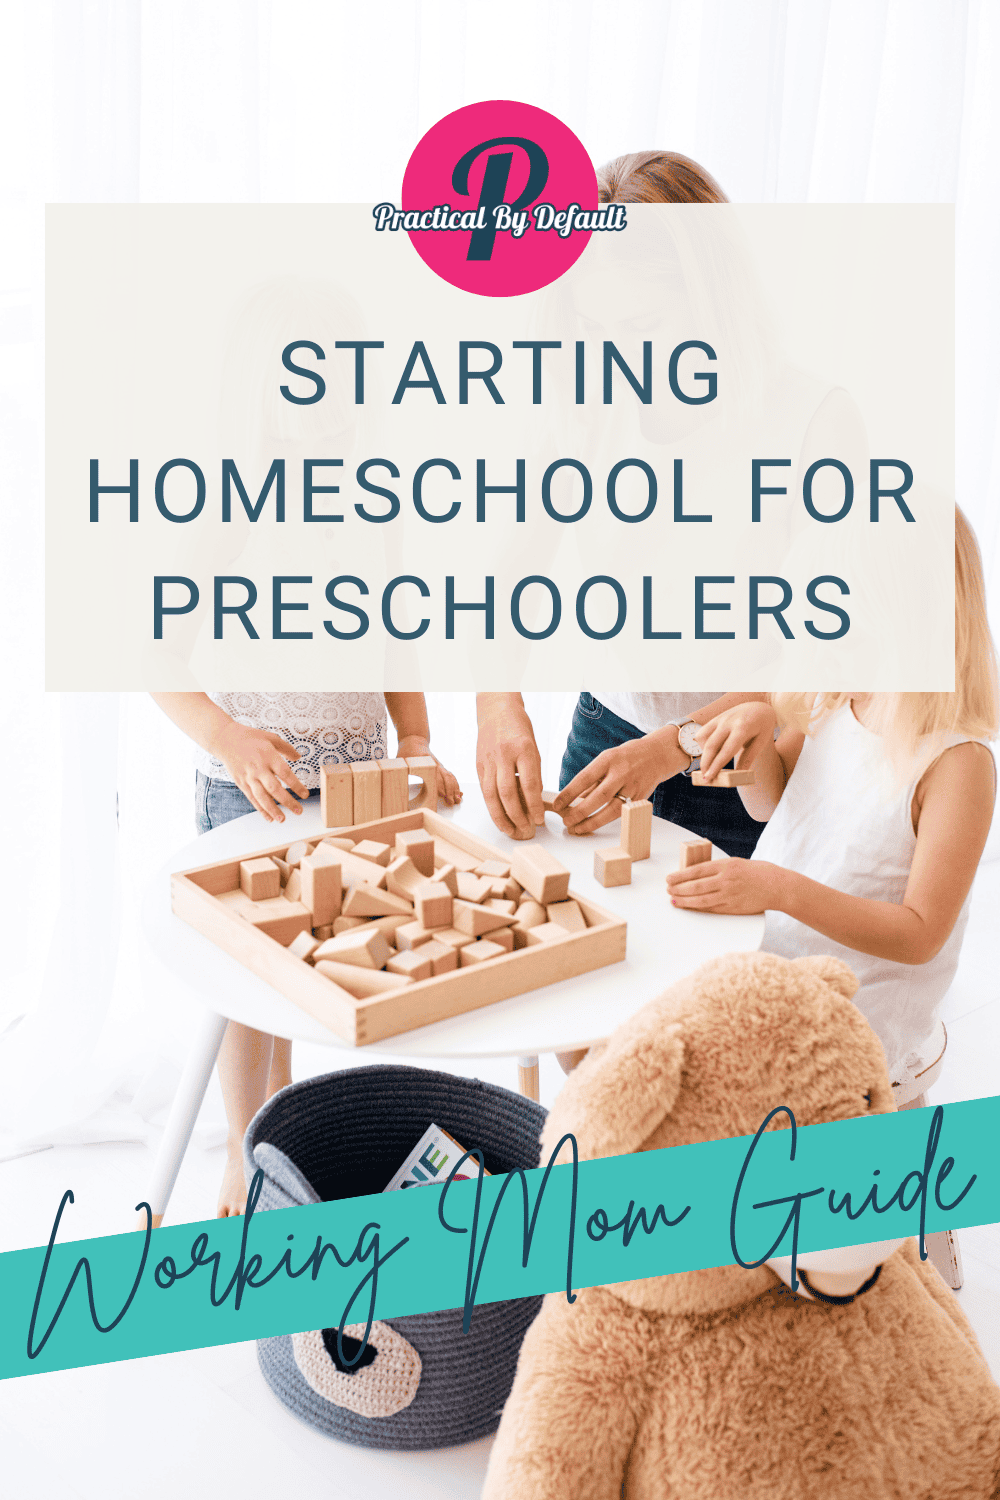 Starting homeschool for preschoolers, image shows children playing at a table with wooden blocks. Working mom guide is included in the next.